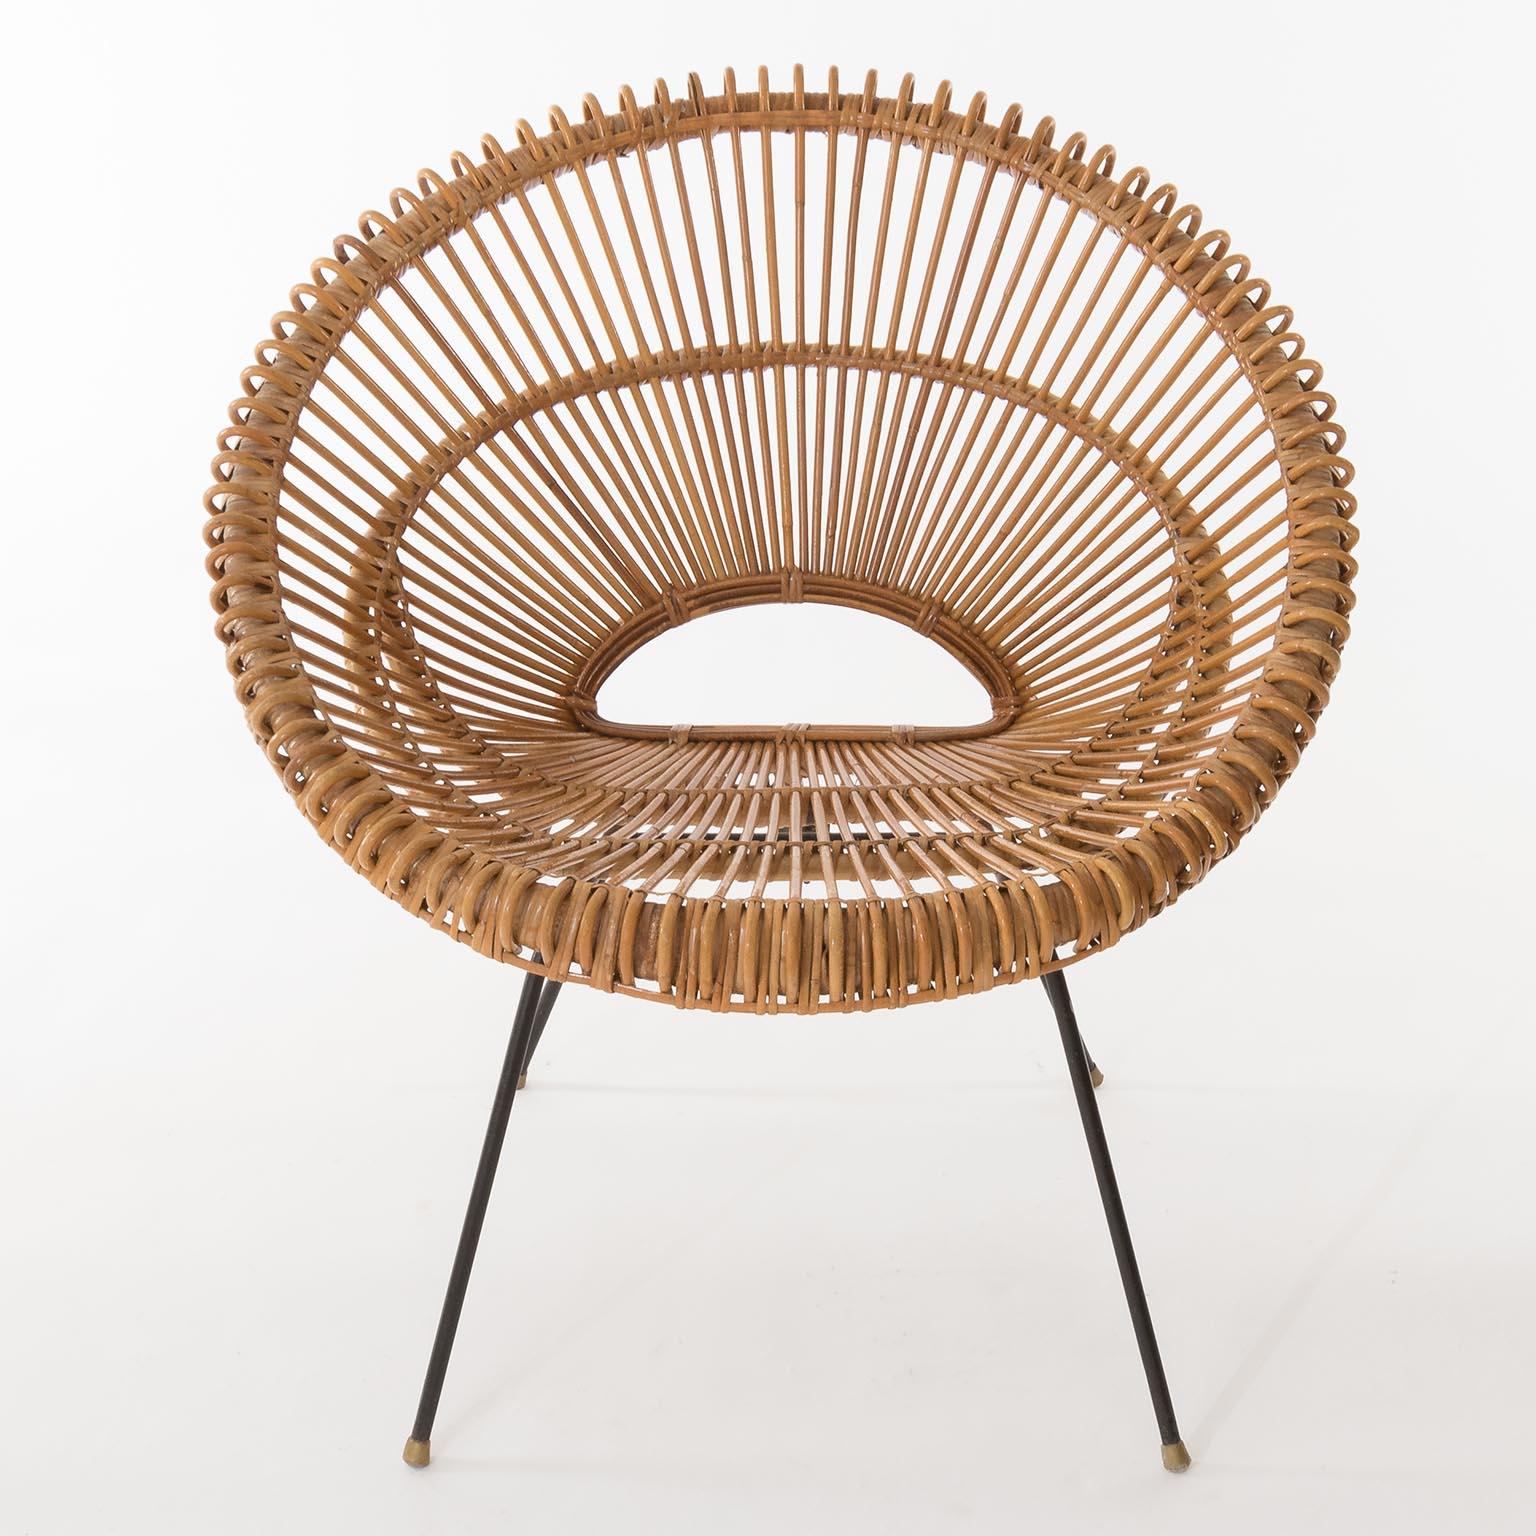 A pair of Riviera chairs made of bamboo, rattan and black metal attributed to Janine Abraham, Dirk Rol, France, circa 1960.